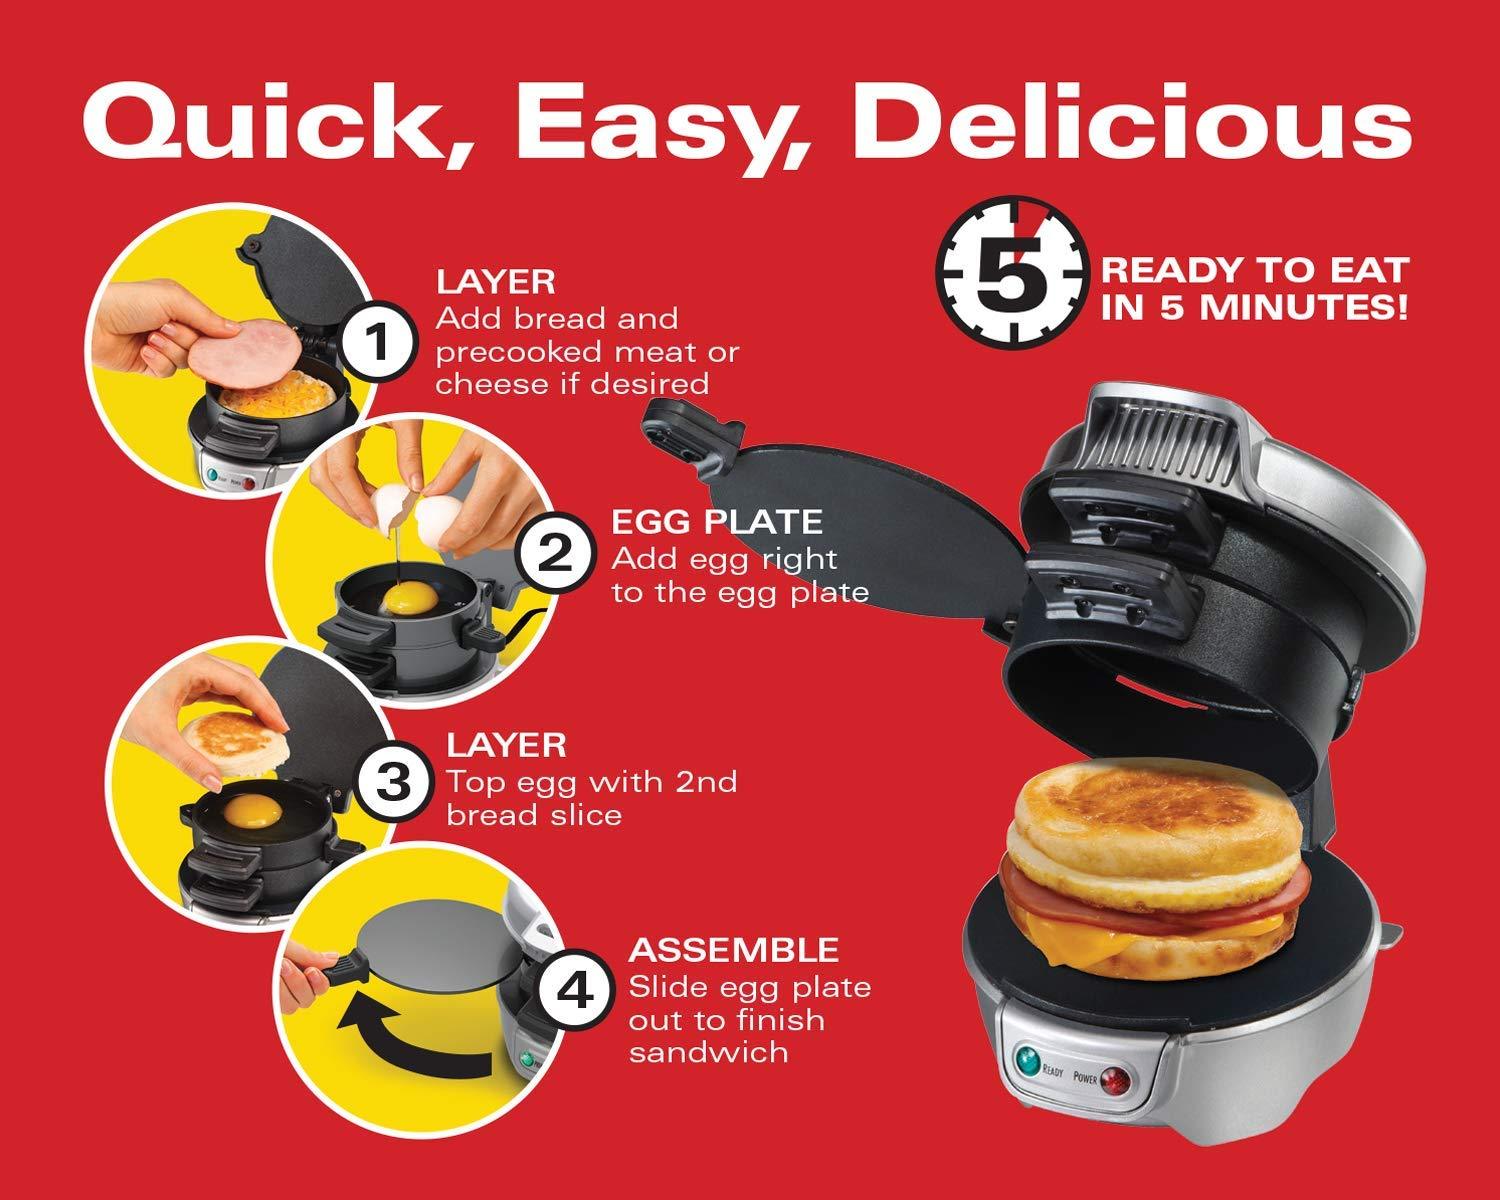 Figured out the best ways to use this egg sandwich maker. Follow